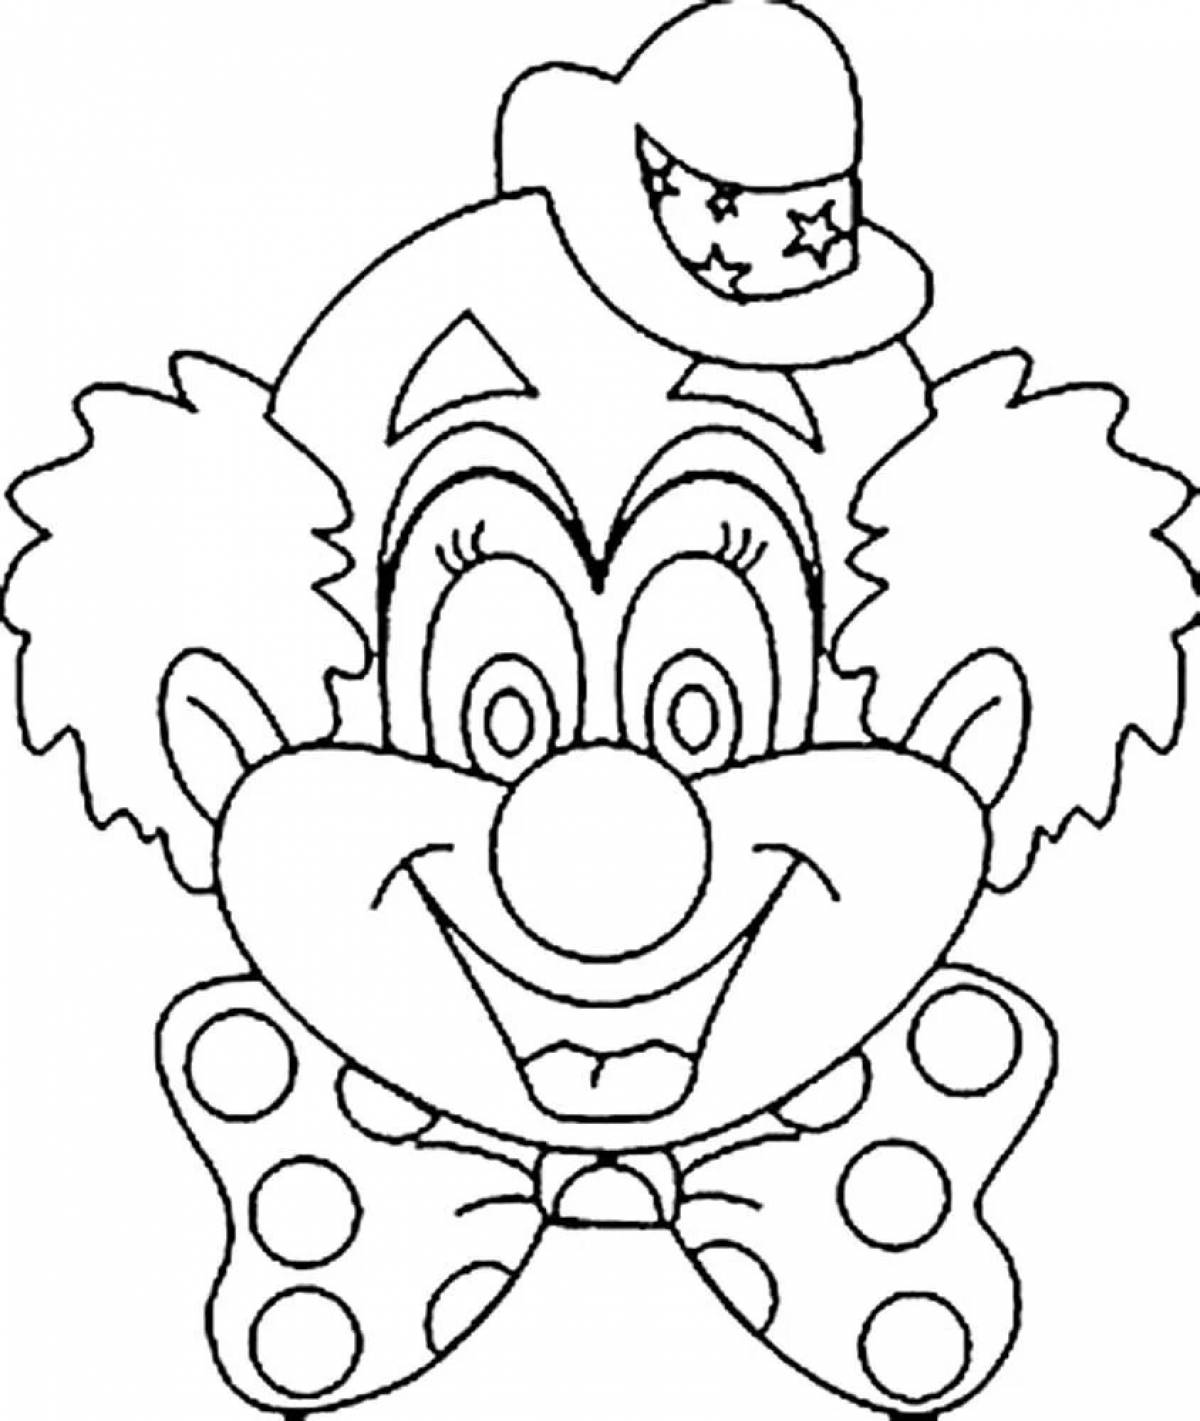 Dazzling clown mask coloring page